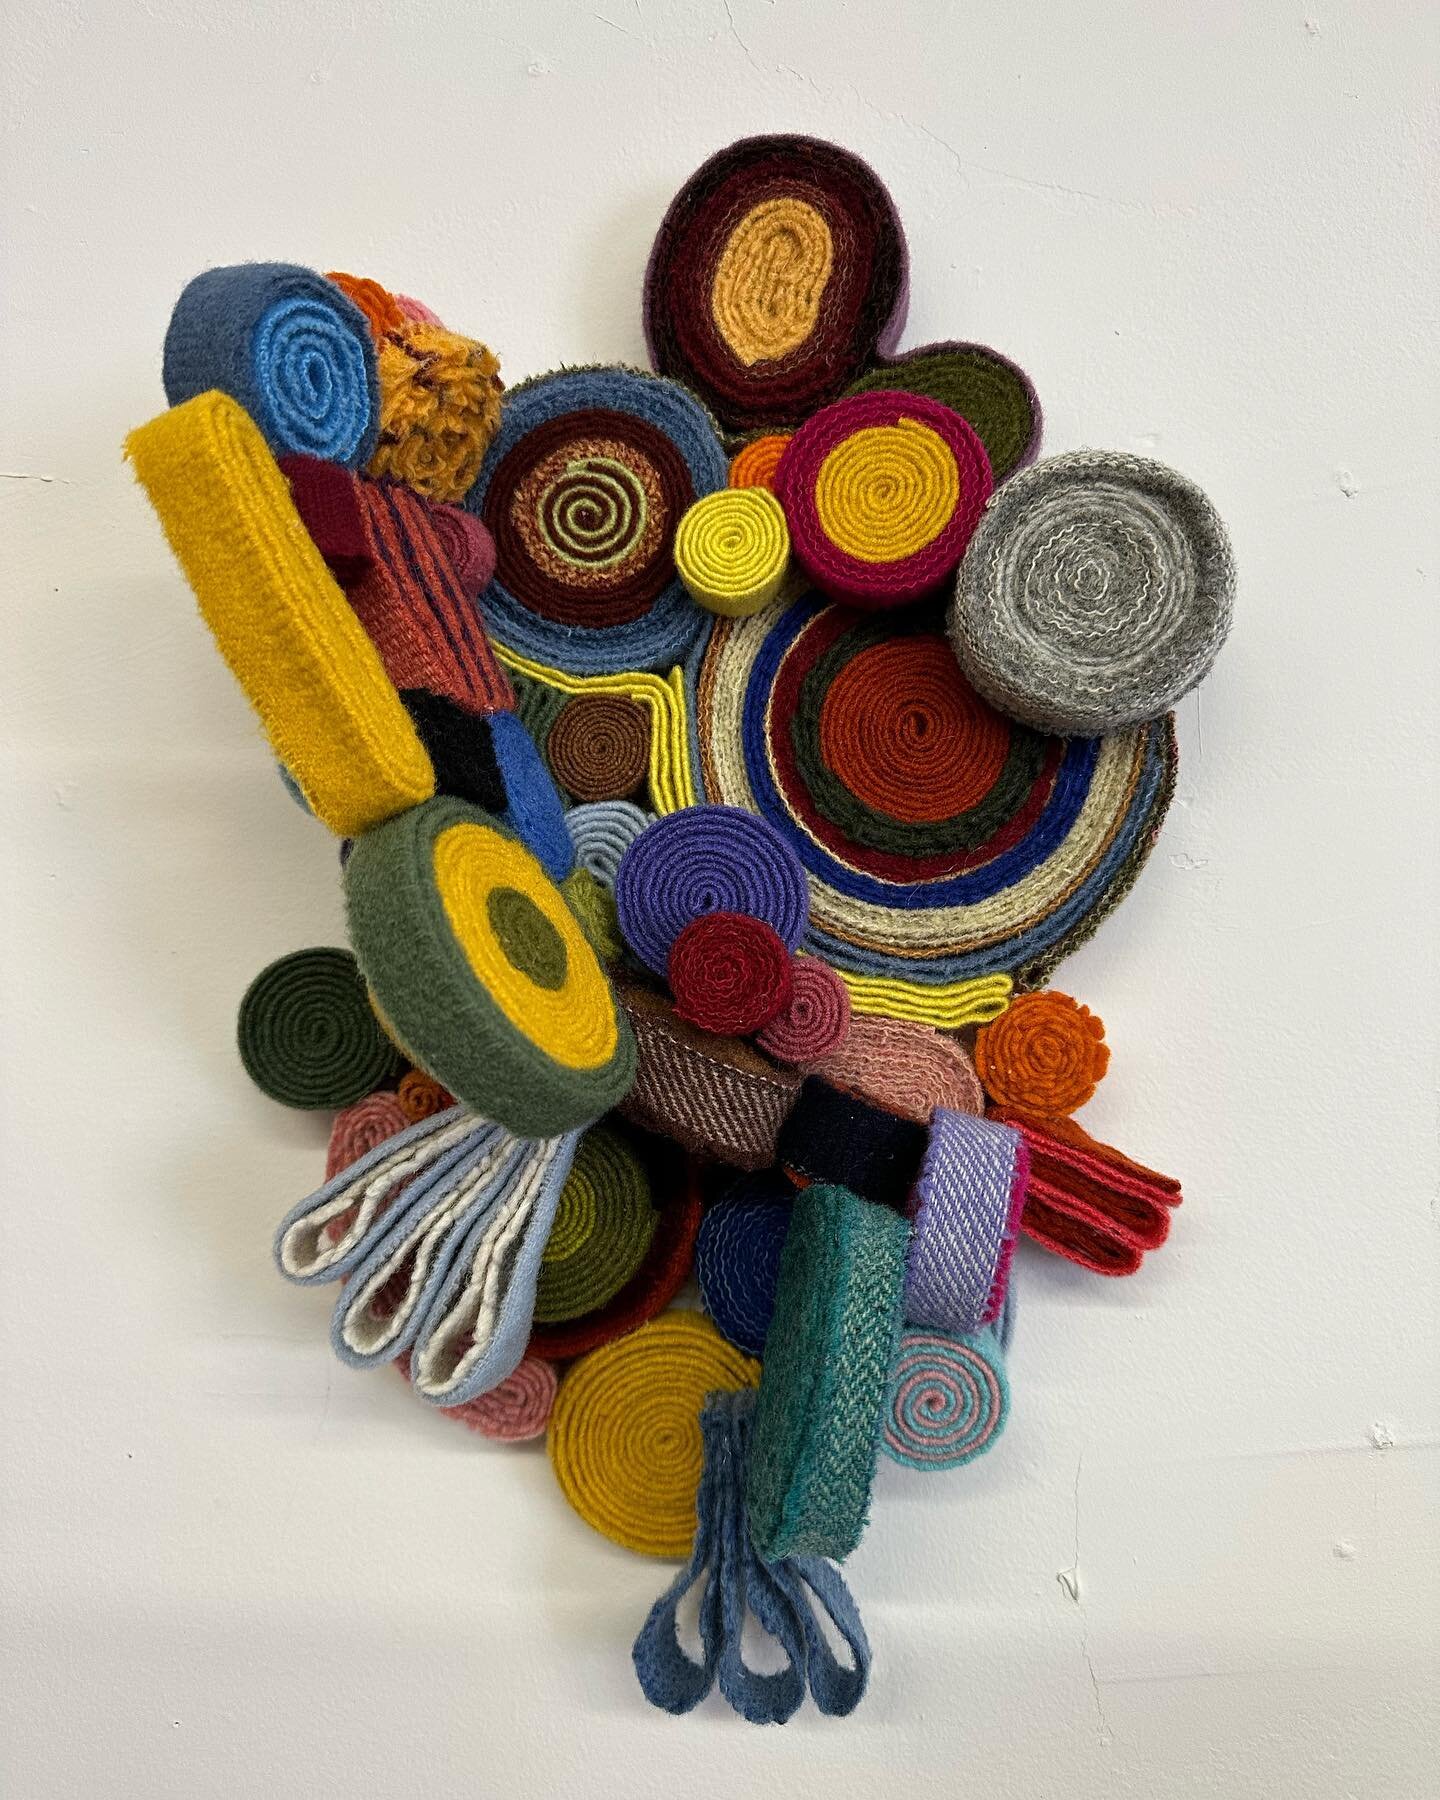 Working on some more wool quillie sculptures. Definitely still figuring it out. This measures roughly 10 by 15 inches. #contemporaryfiberart #fiberart #contemporaryartist #woolart #riarts